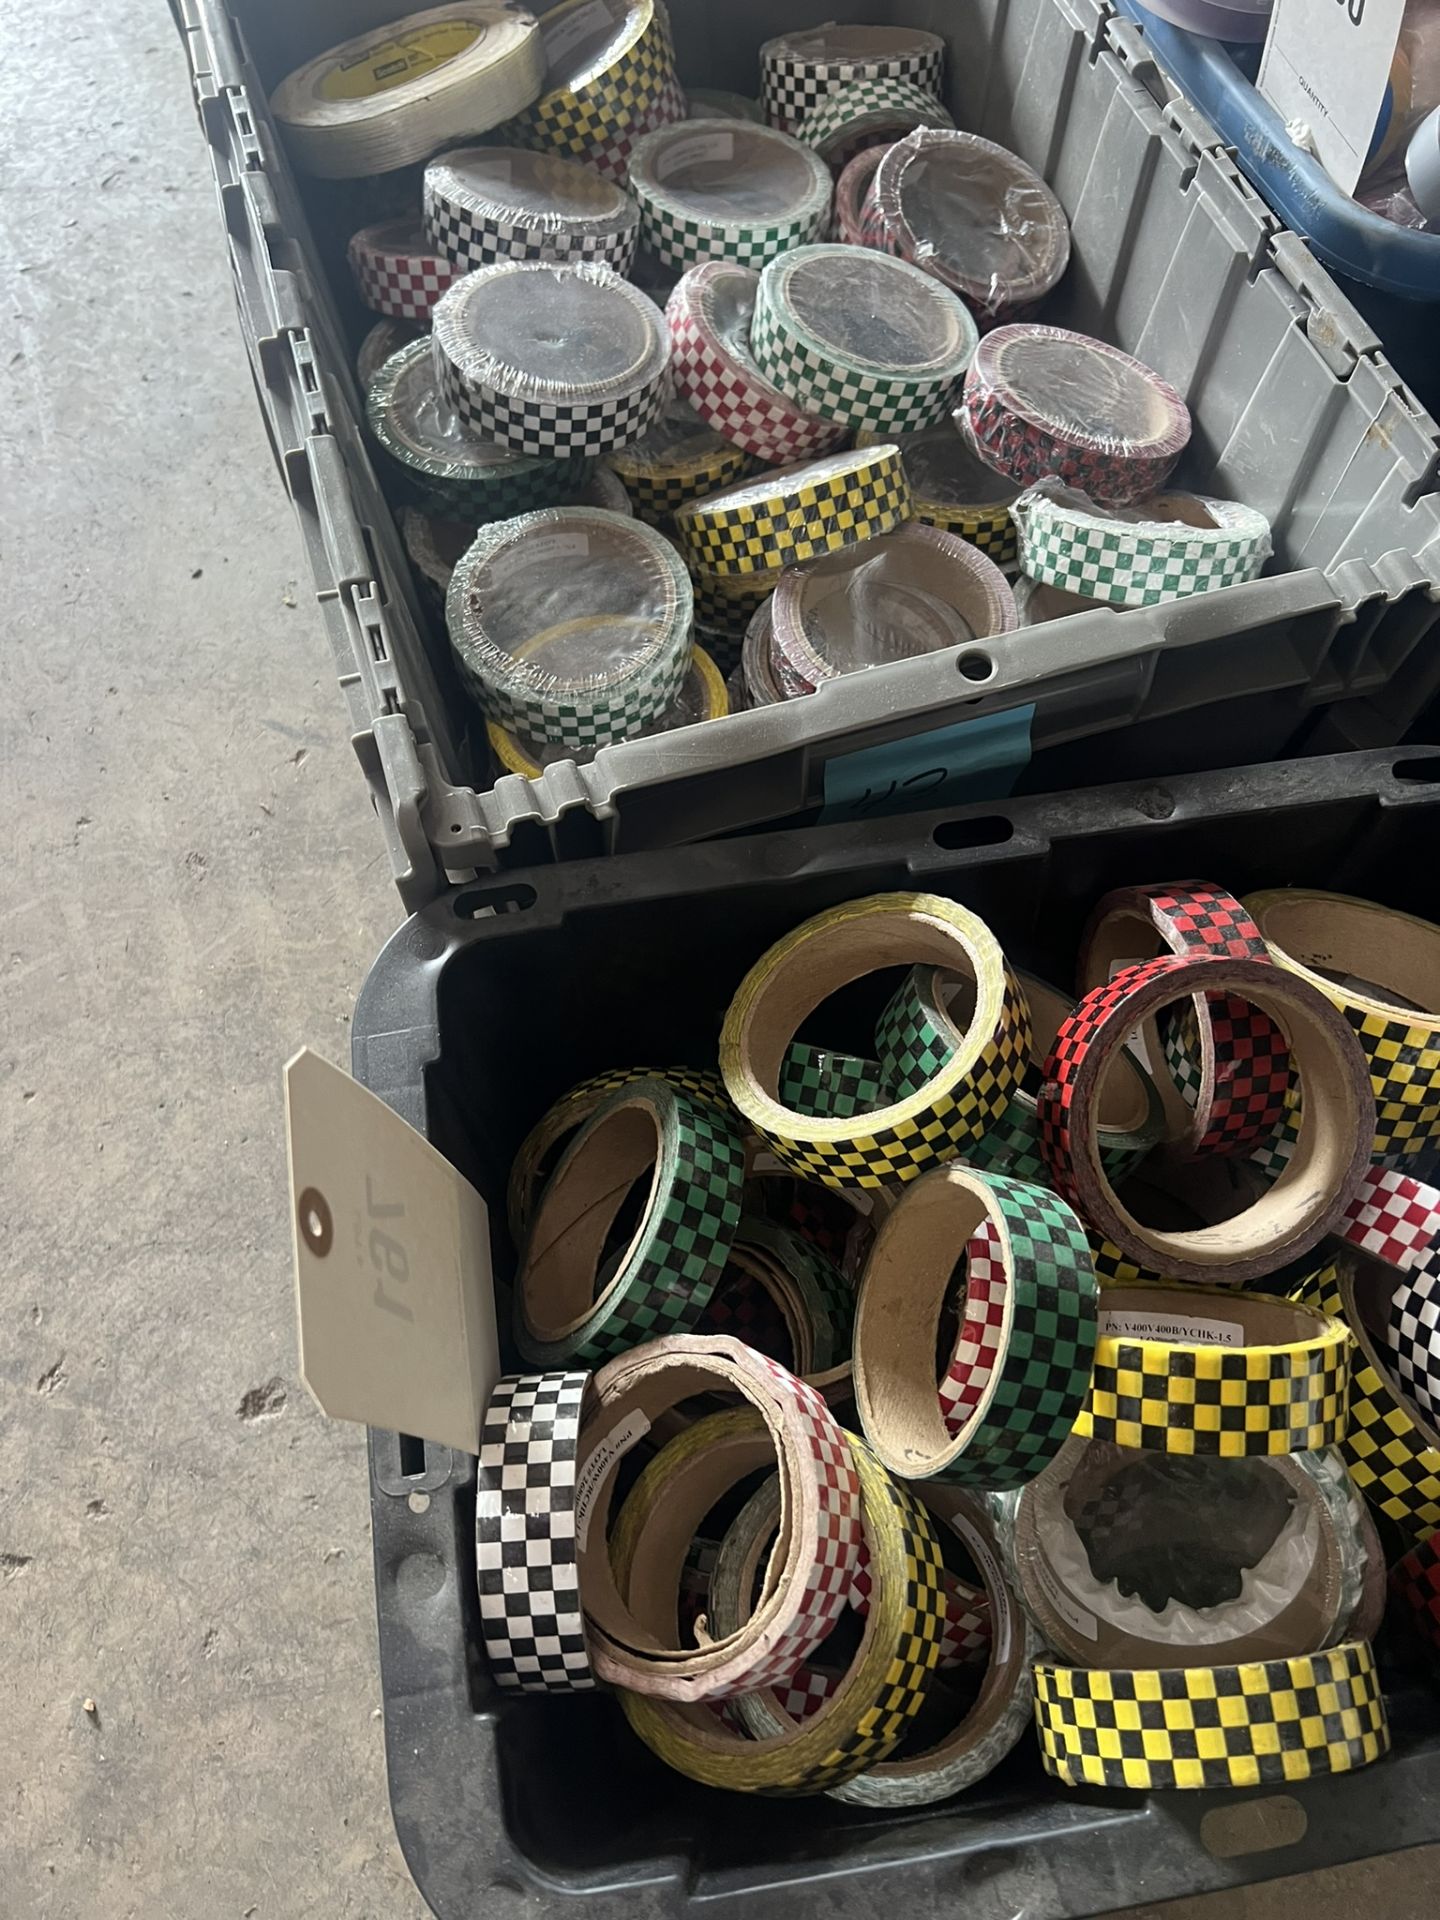 2 Totes of Checkered Electrical Tape